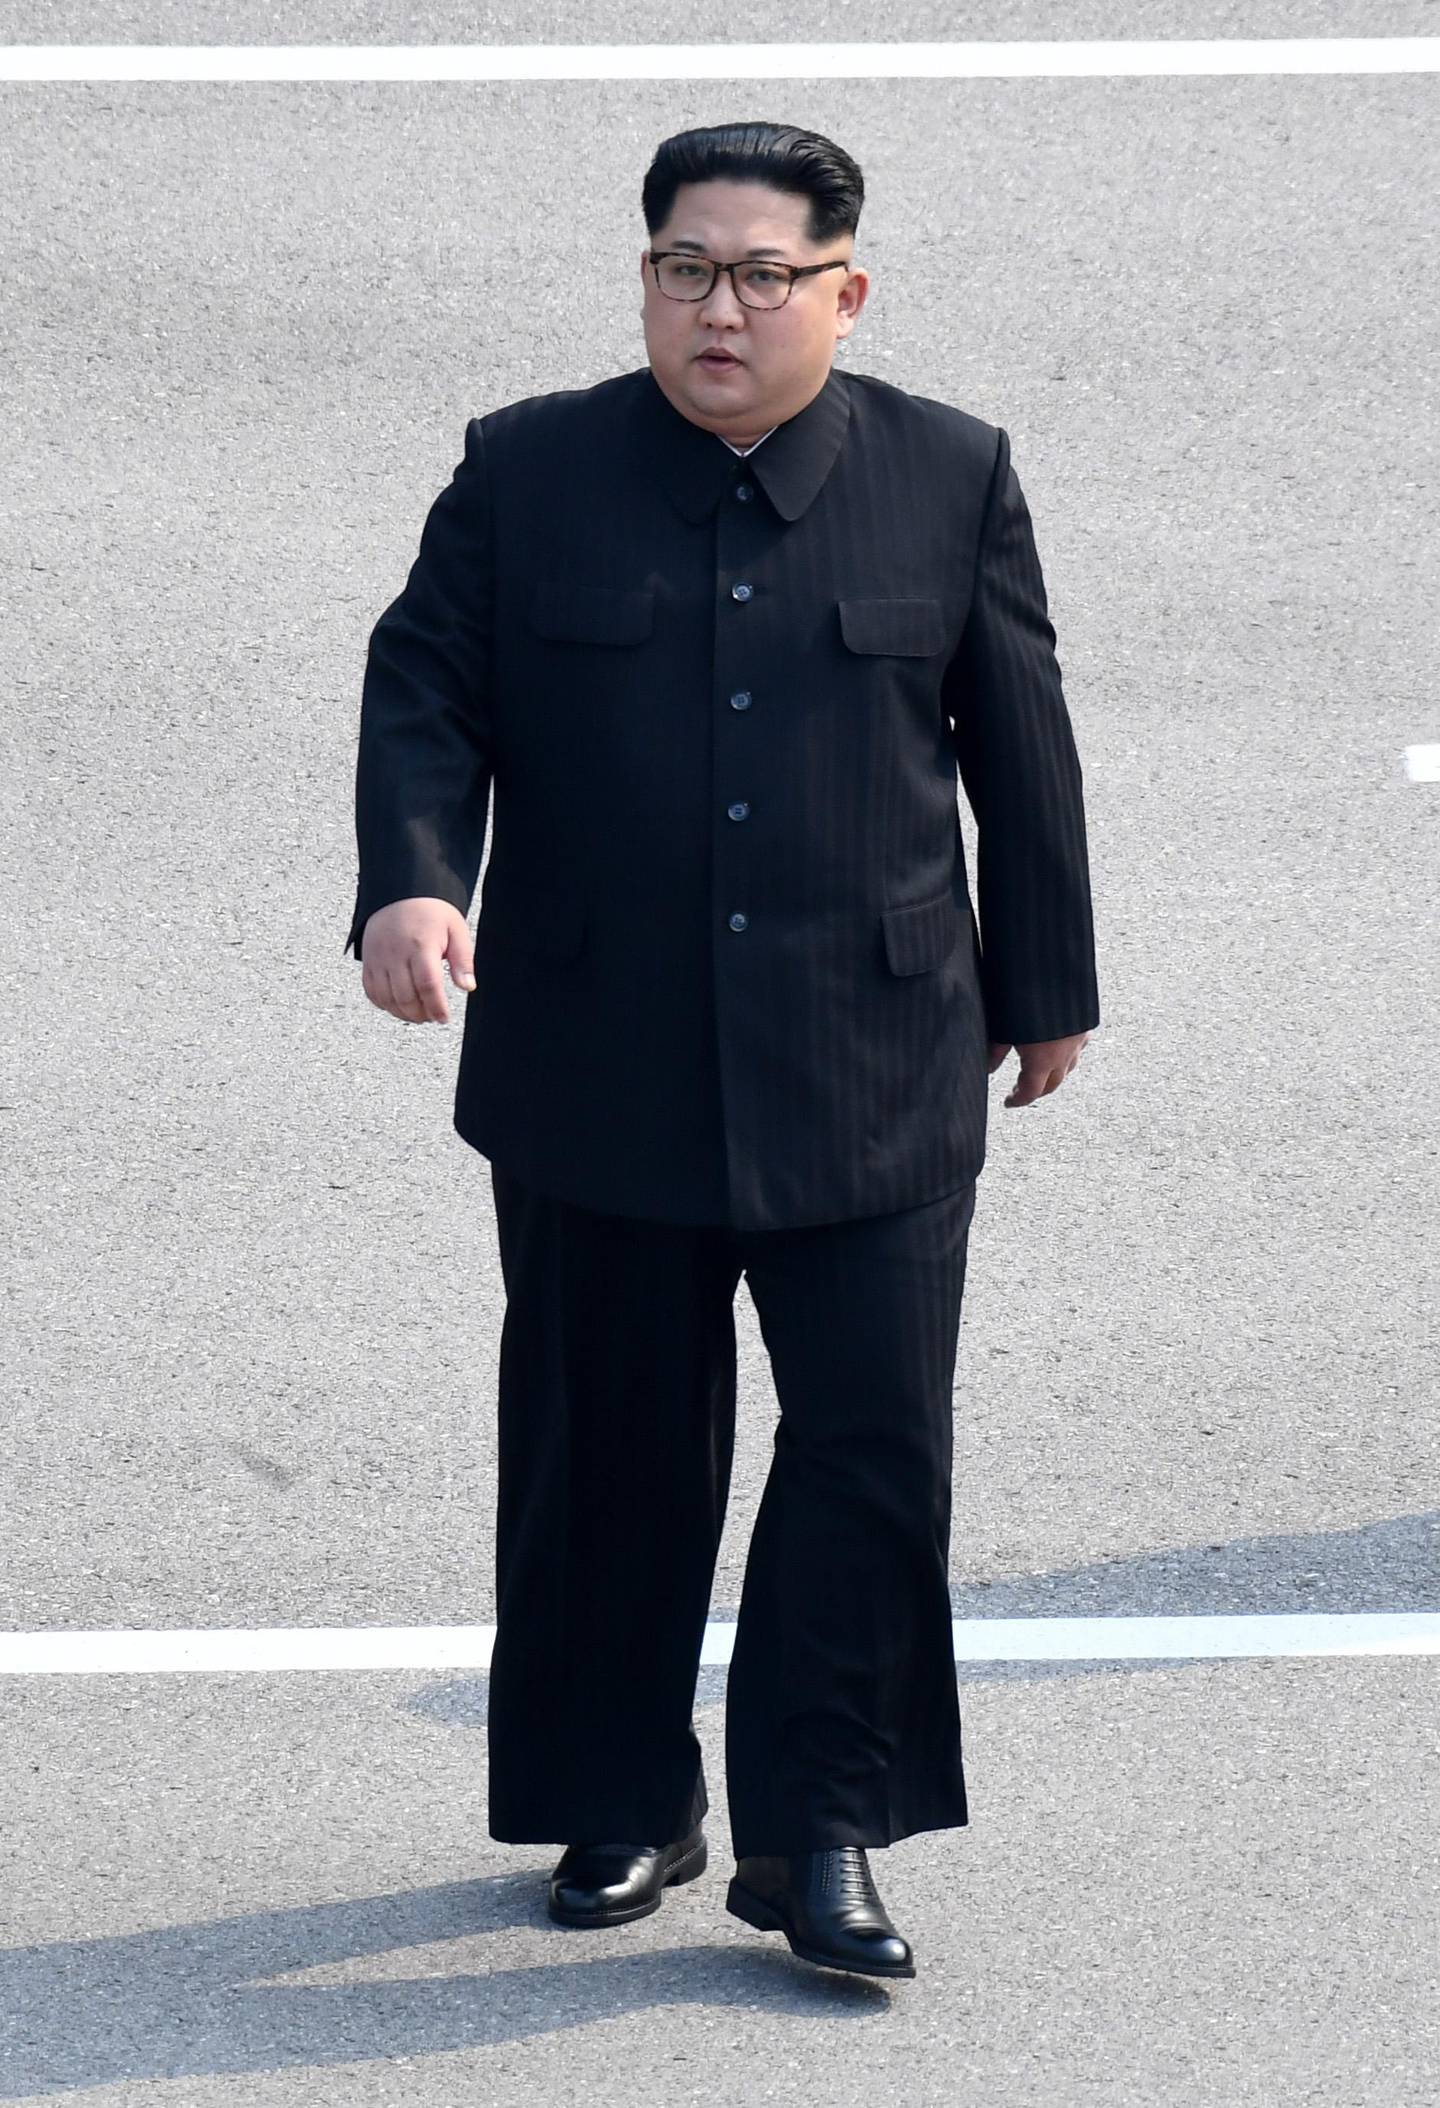 North Korea's leader Kim Jong Un walks from the North to the Military Demarcation Line that divides the two Koreas to meet with his South Korean counterpart at the truce village of Panmunjom on April 27, 2018.
North Korean leader Kim Jong Un and the South's President Moon Jae-in sat down to a historic summit on April 27 after shaking hands over the Military Demarcation Line that divides their countries in a gesture laden with symbolism. / AFP PHOTO / Korea Summit Press Pool / Korea Summit Press Pool